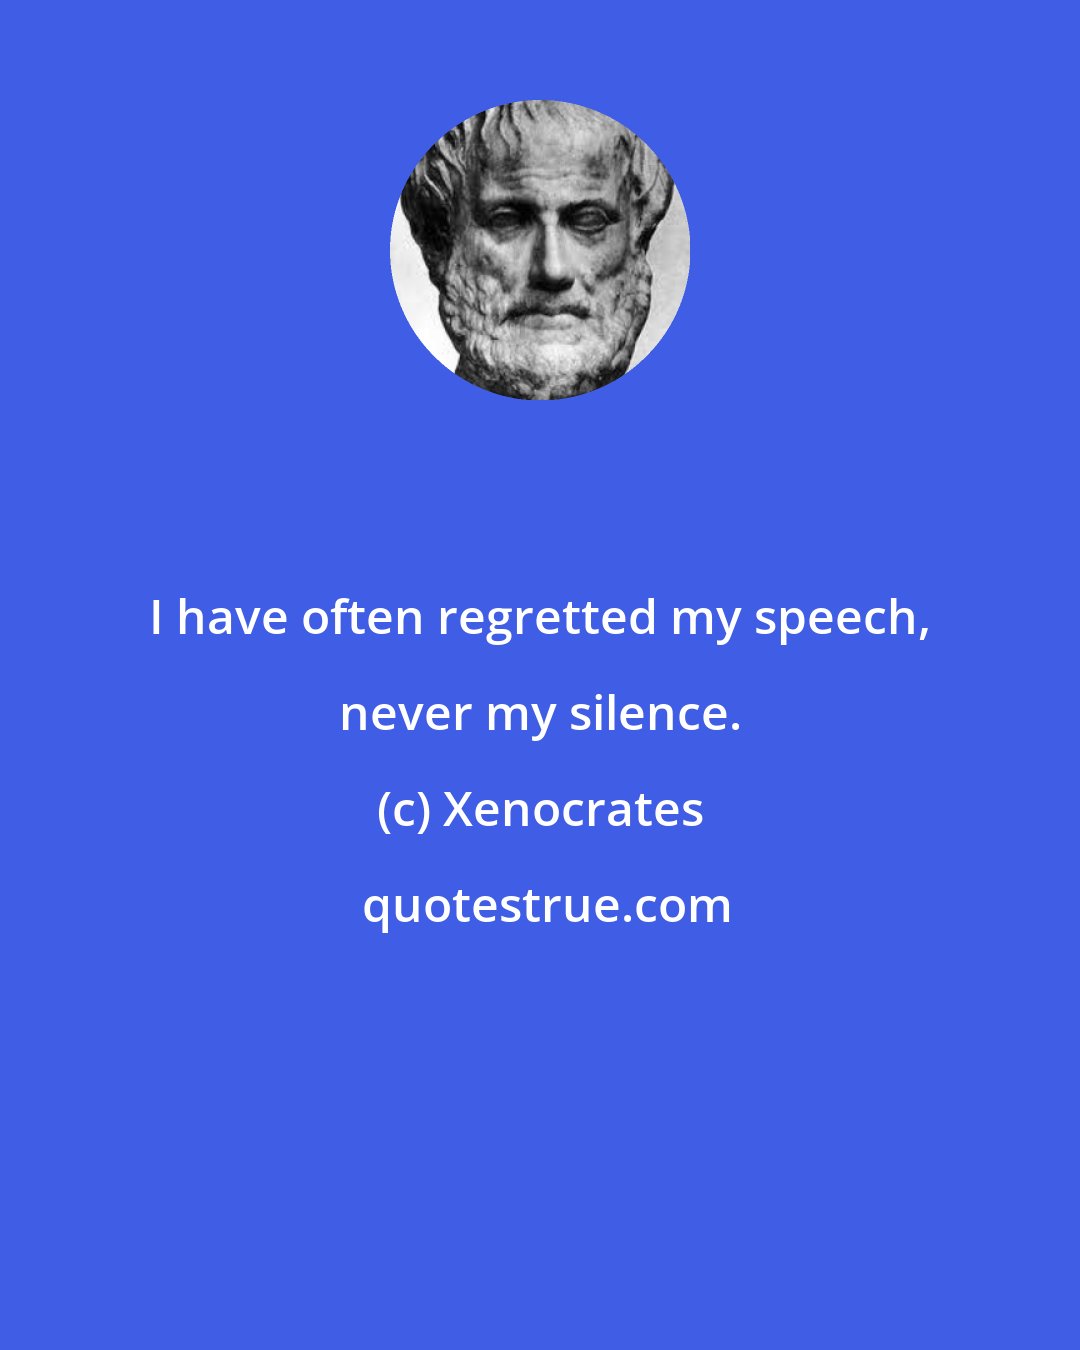 Xenocrates: I have often regretted my speech, never my silence.